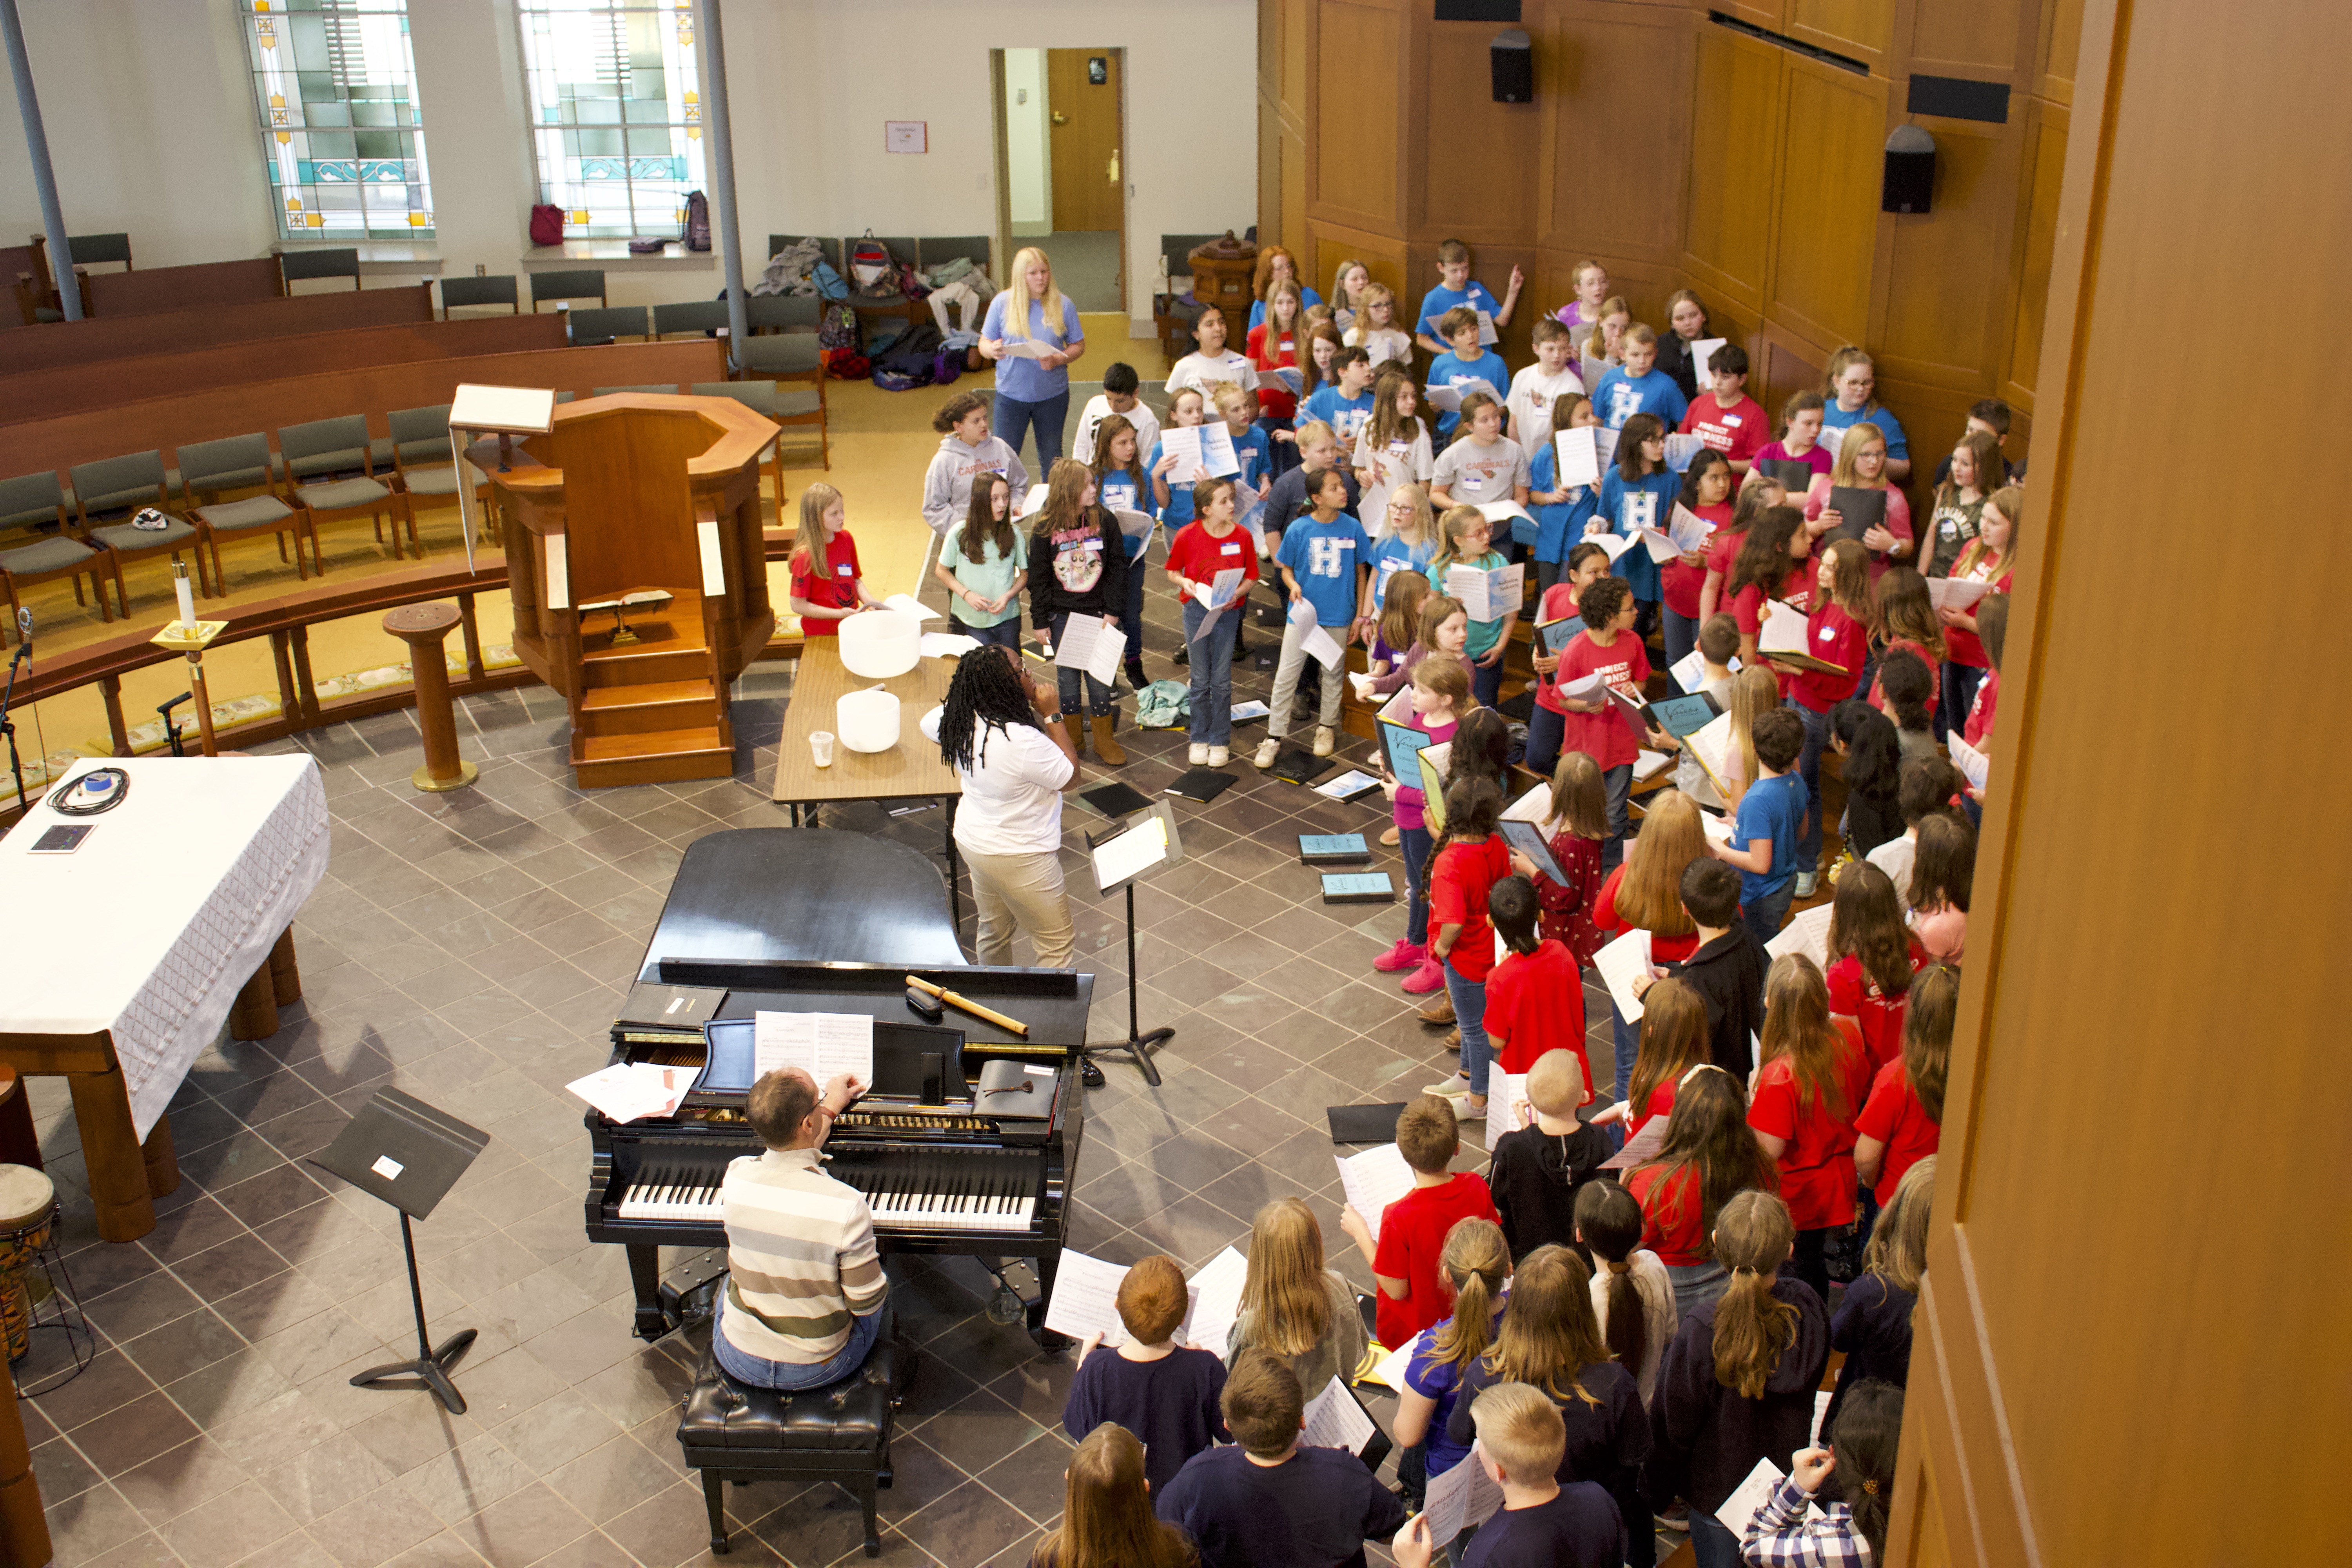 Voices in the Laurel students sing together